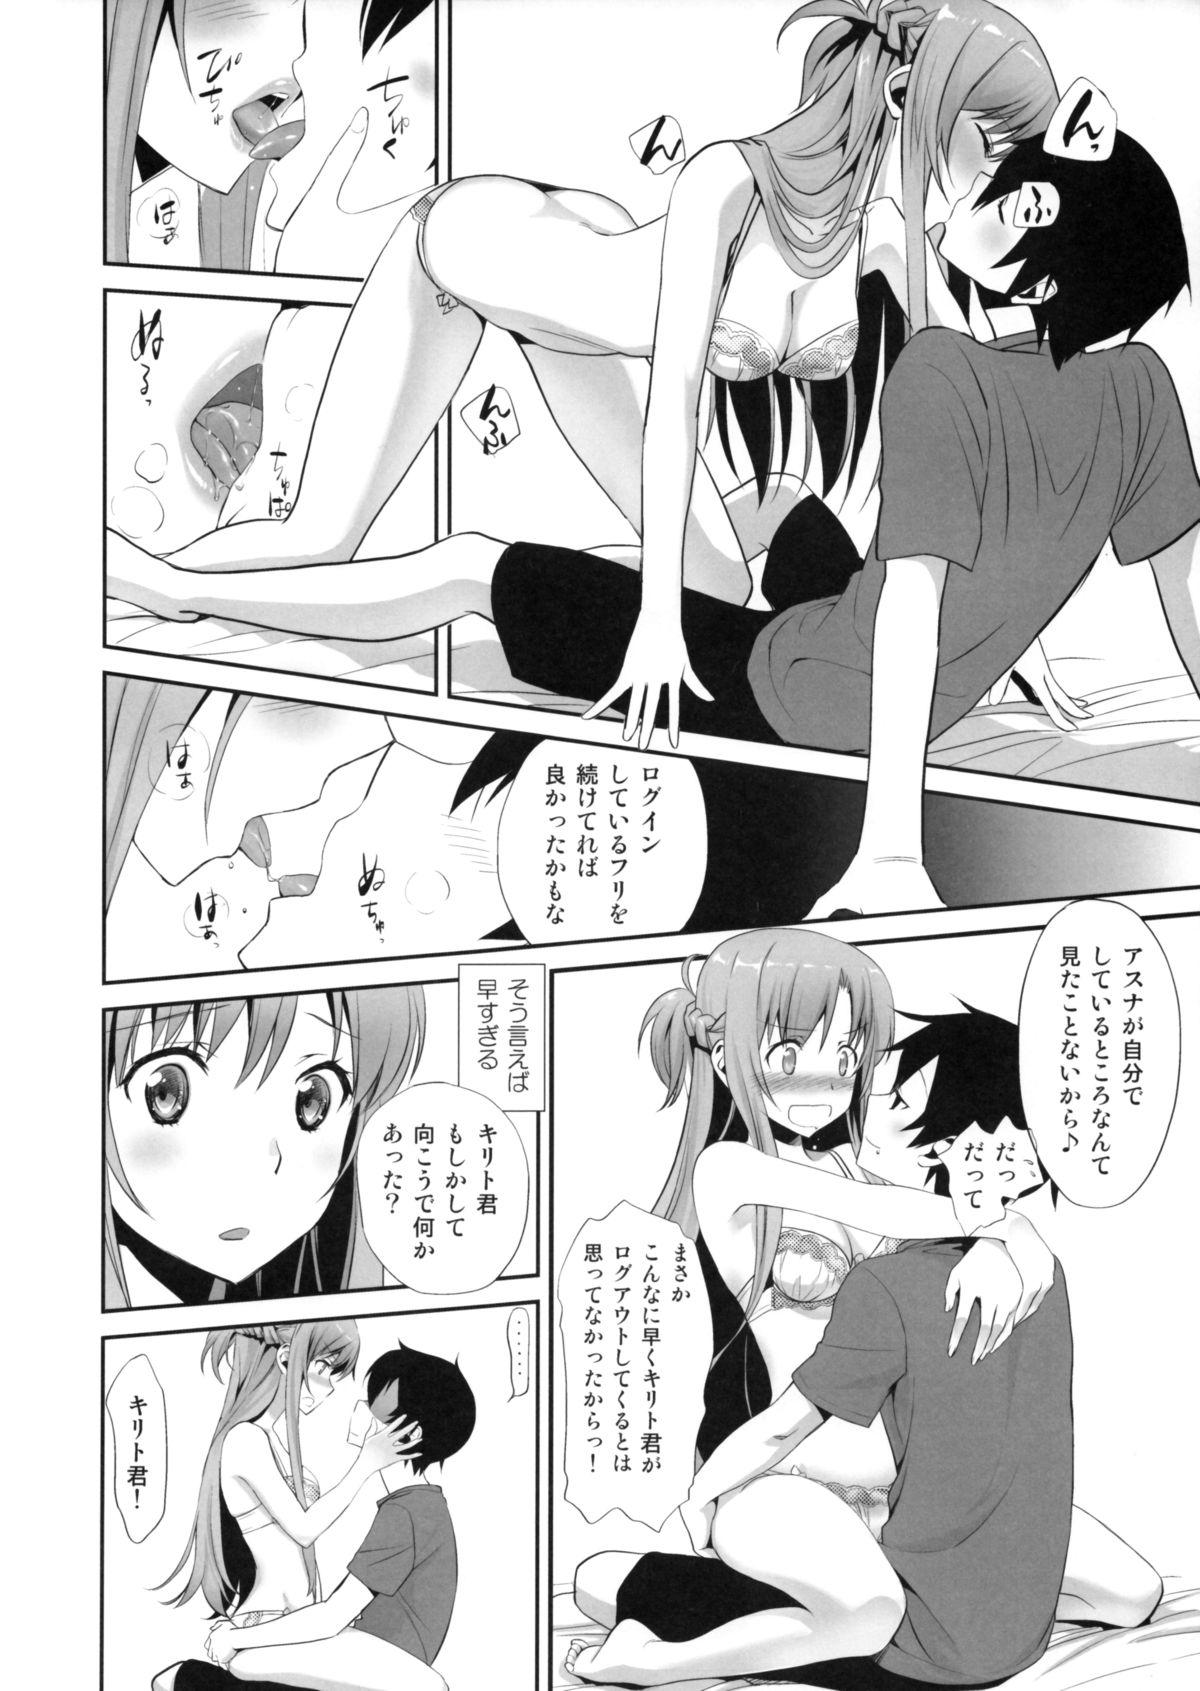 Farting Sunny-side up? - Sword art online Straight - Page 11